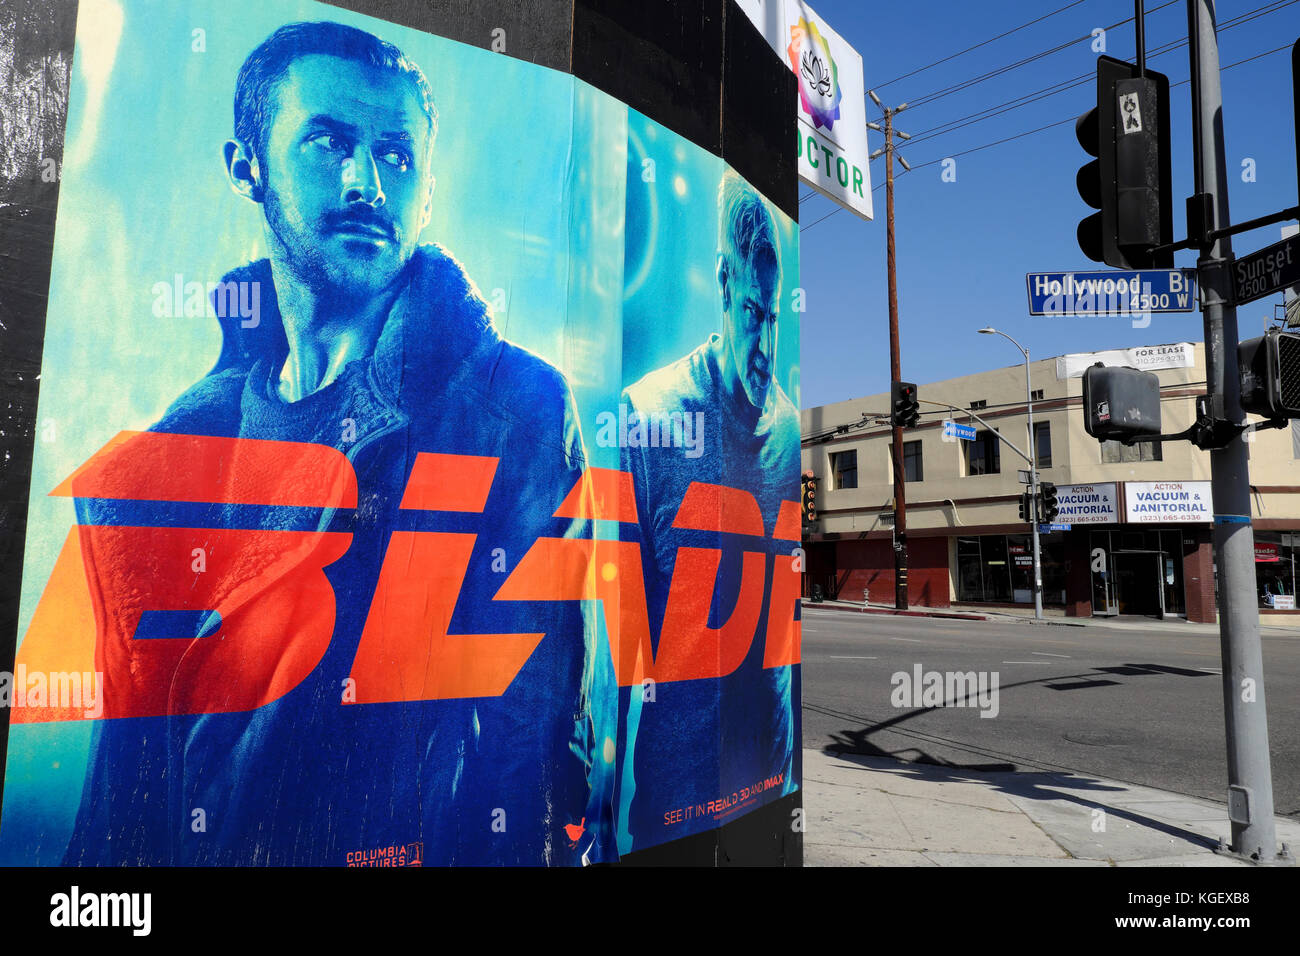 'BLADE RUNNER 2049' advertising poster billboard on a hoarding at Hollywood and Sunset Boulevard in Los Angeles, California  KATHY DEWITT Stock Photo